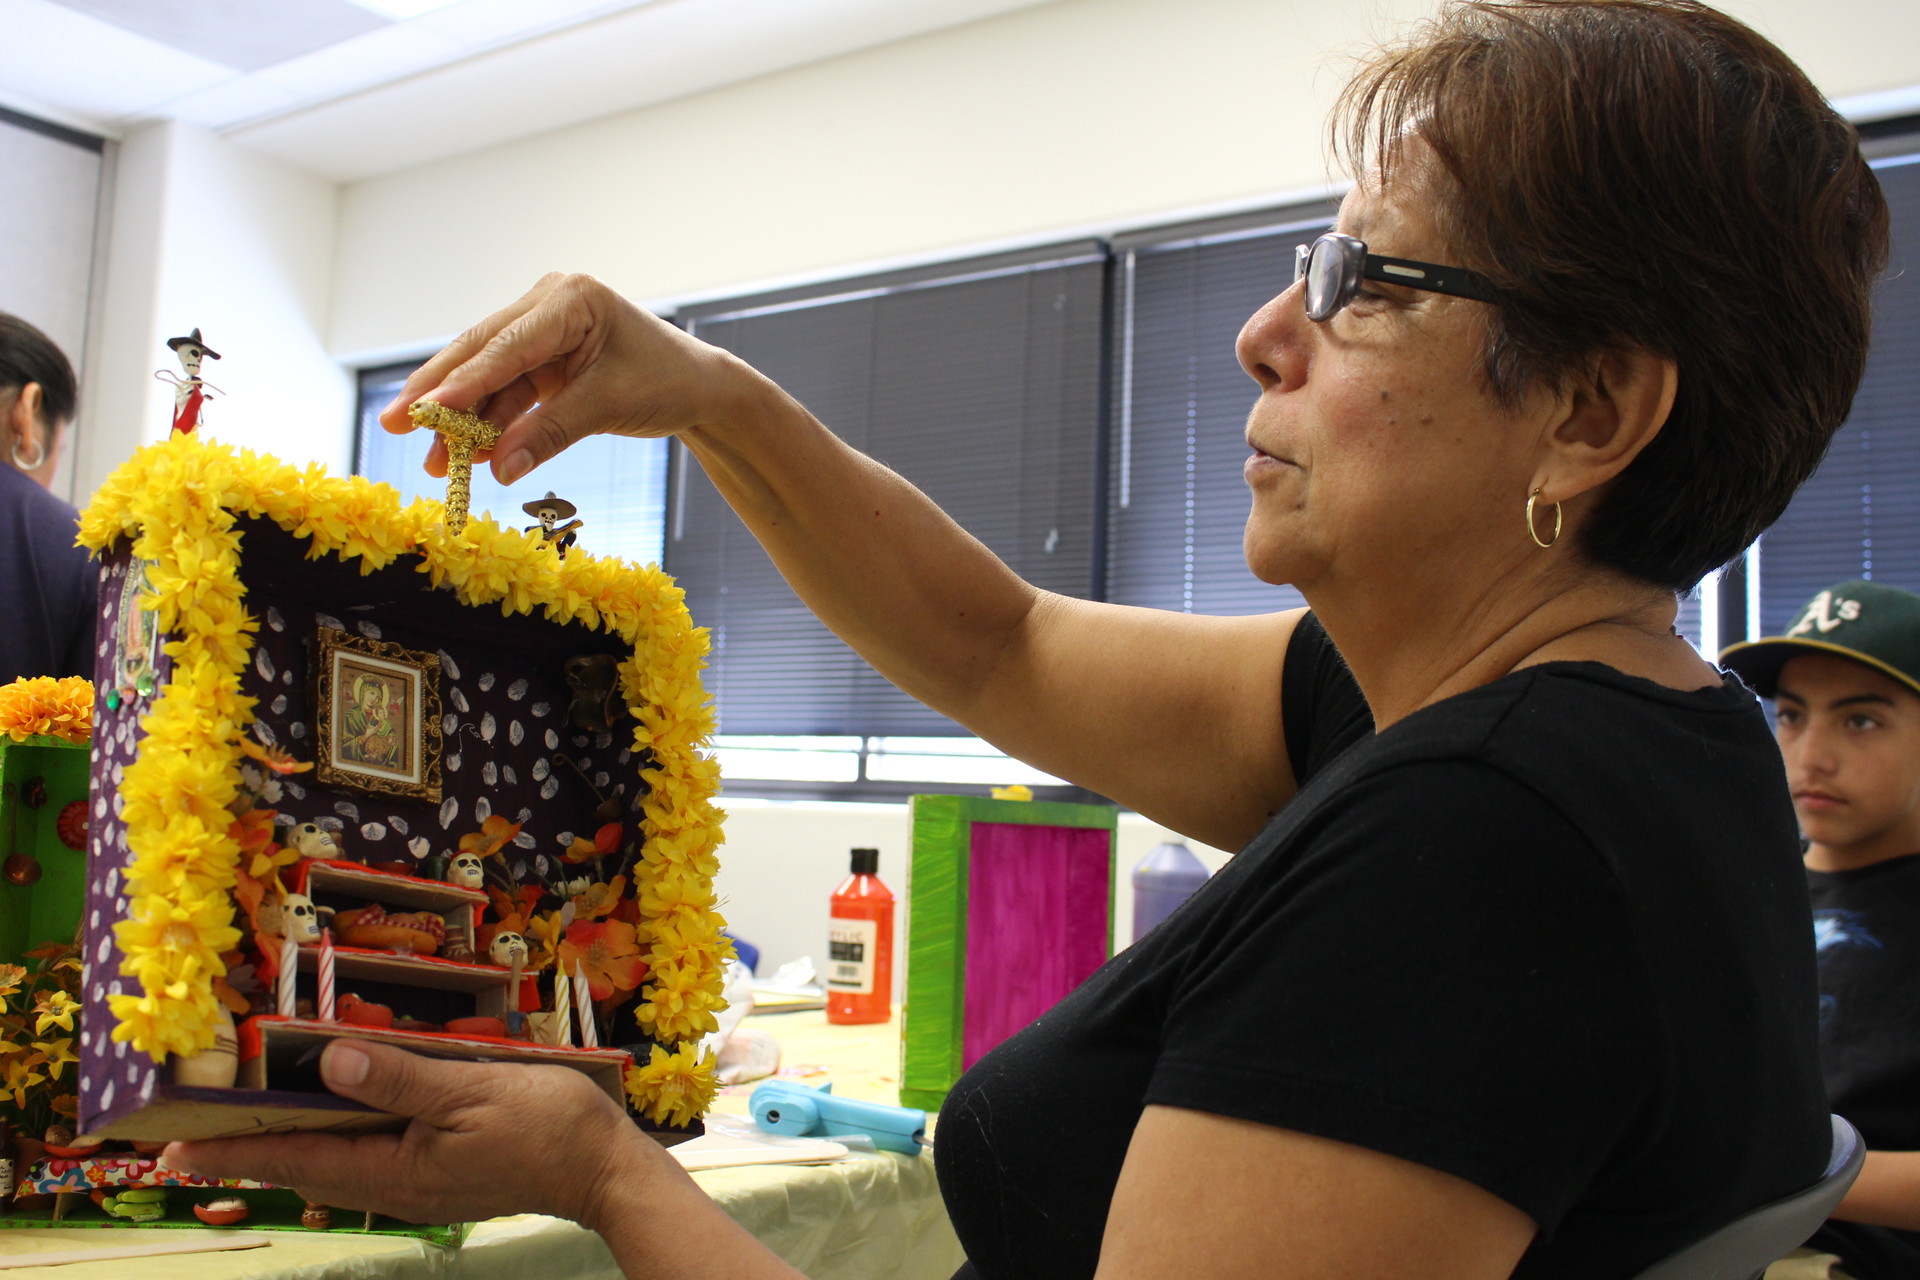 Yolanda Tell shows off a nicho she made for her daughter, as grandson Victor Hugo Perez looks on. Tell’s daugher died in a car accident when Perez was 3 years old. Tell takes care of him and his brother. 